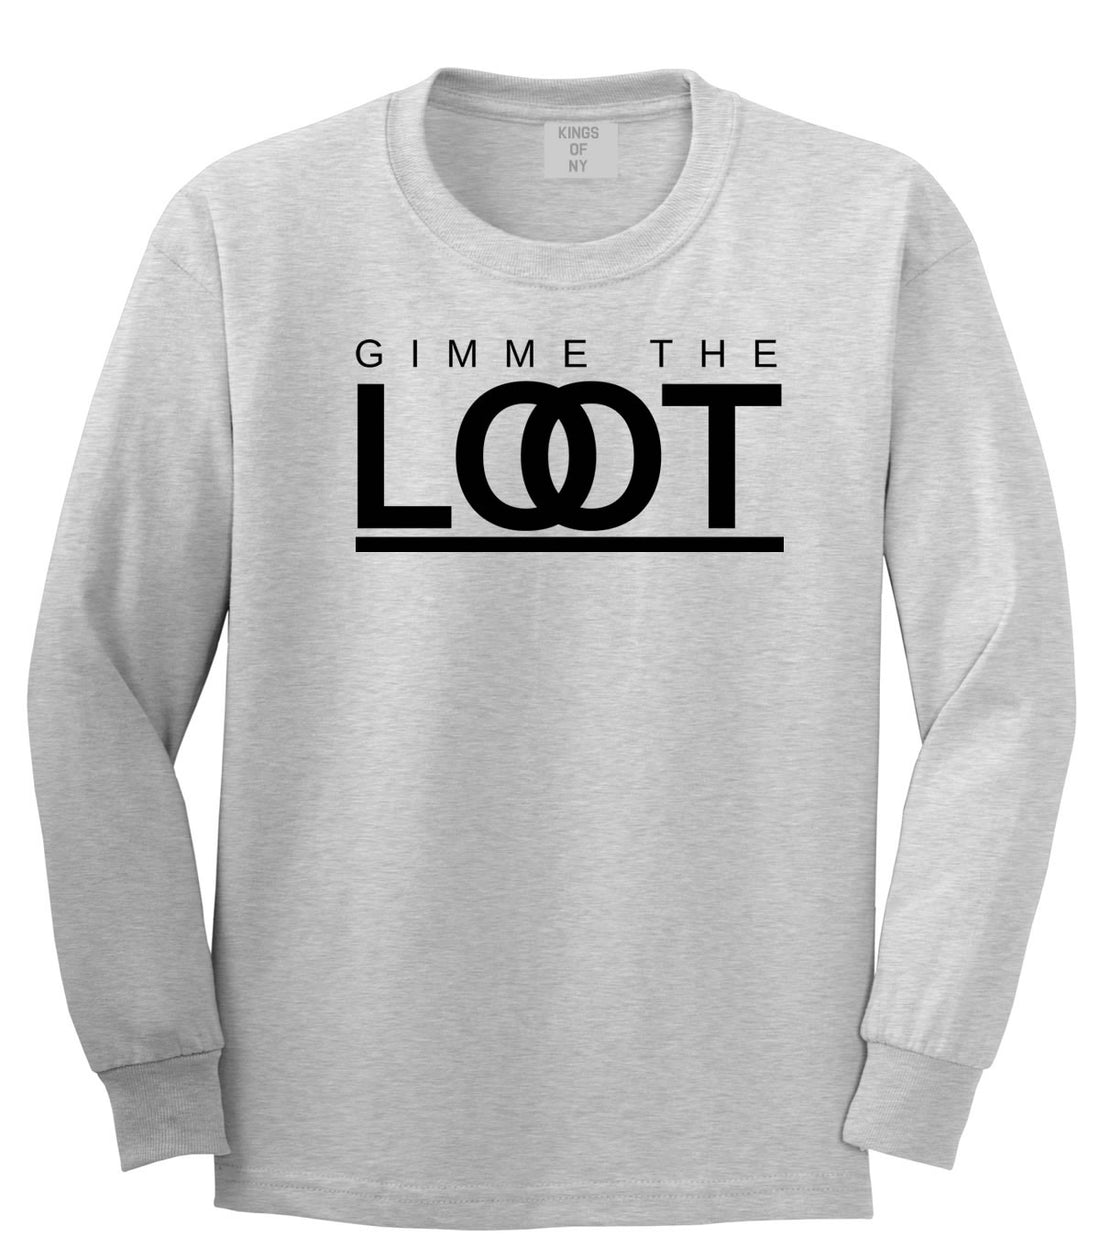 Gimme The Loot  Long Sleeve T-Shirt in Grey By Kings Of NY